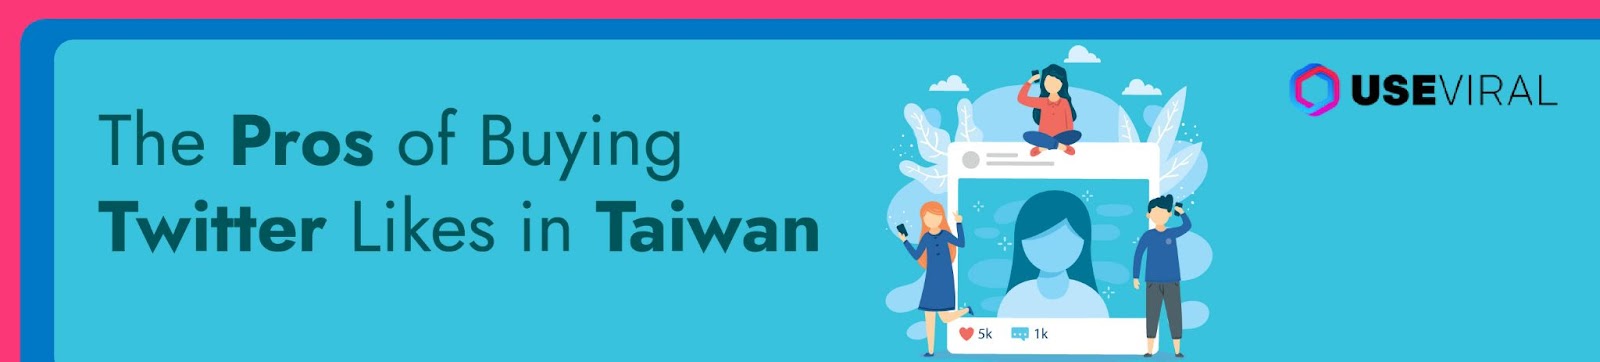 The Pros of Buying Twitter Likes in Taiwan